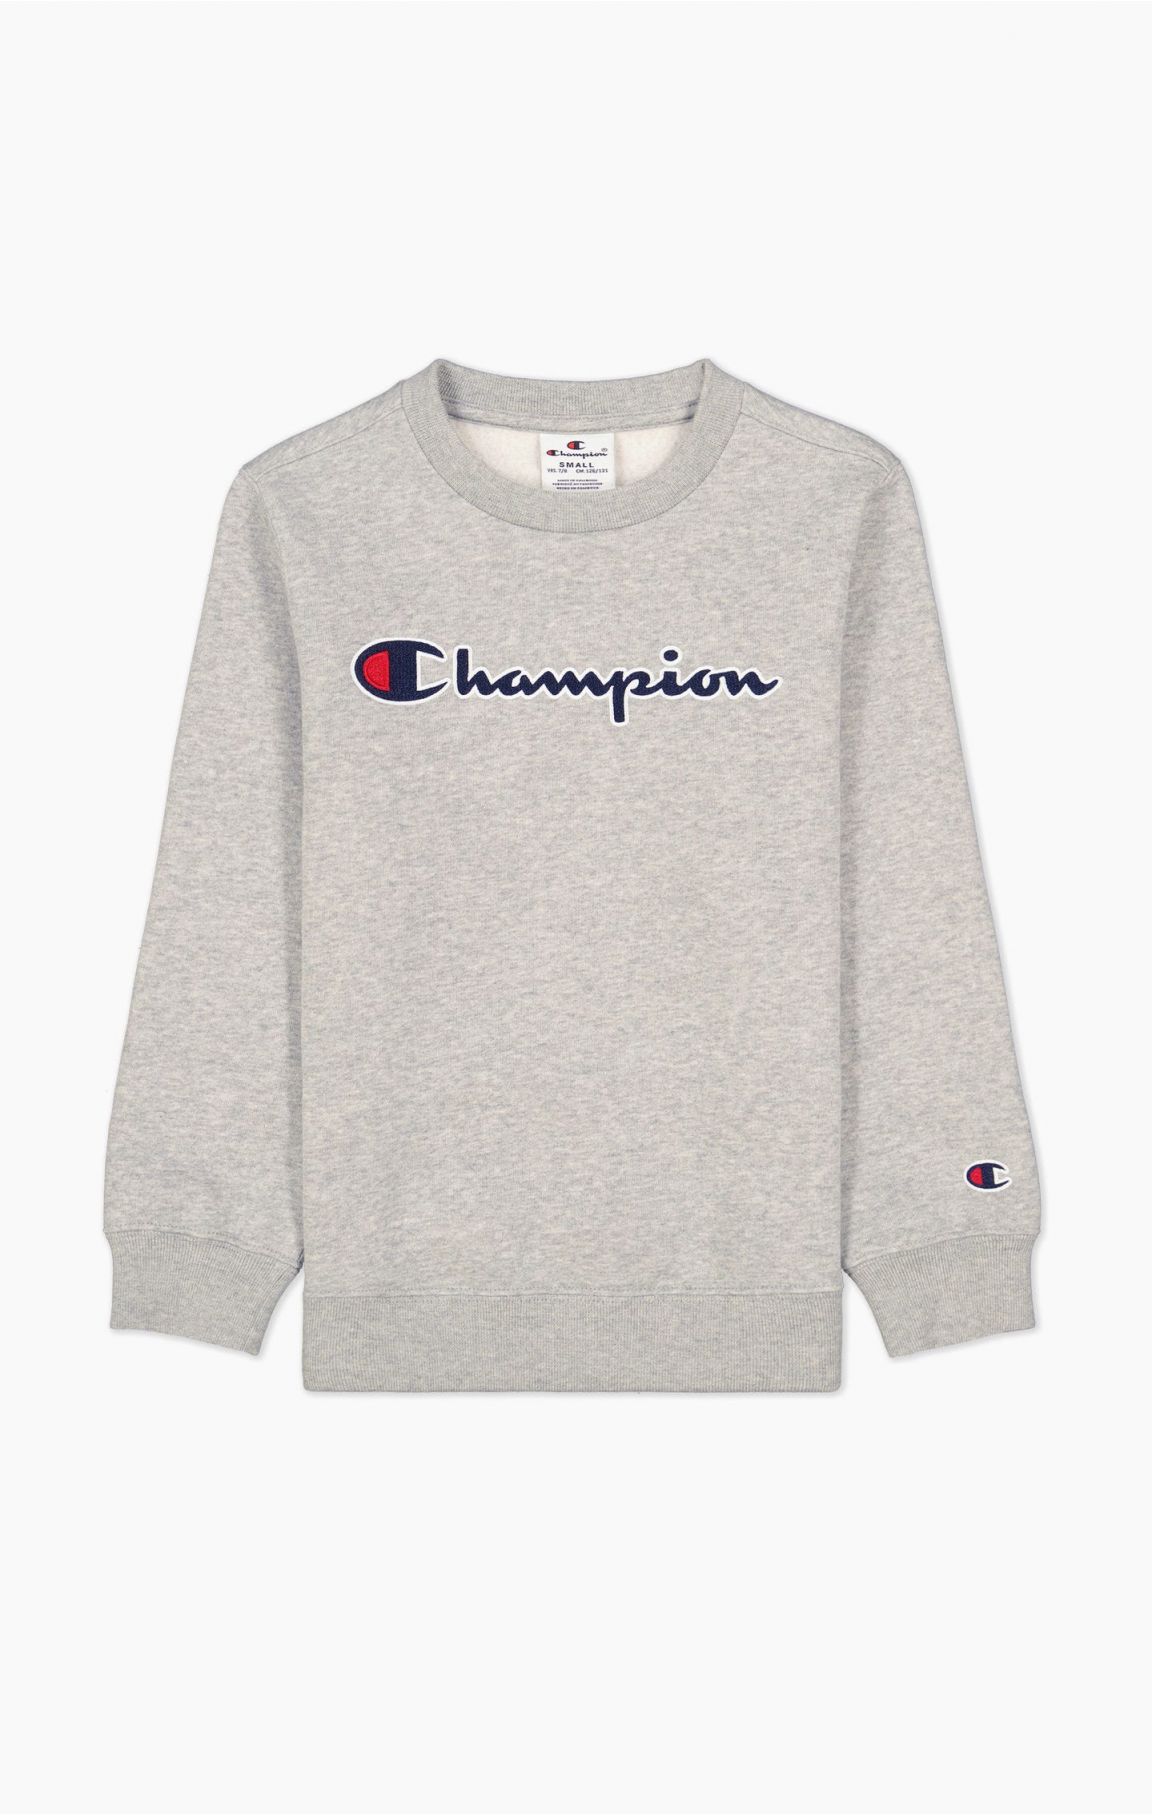 Adaptation ordinaire continuer pull champion 14 ans Compte Je suis ...